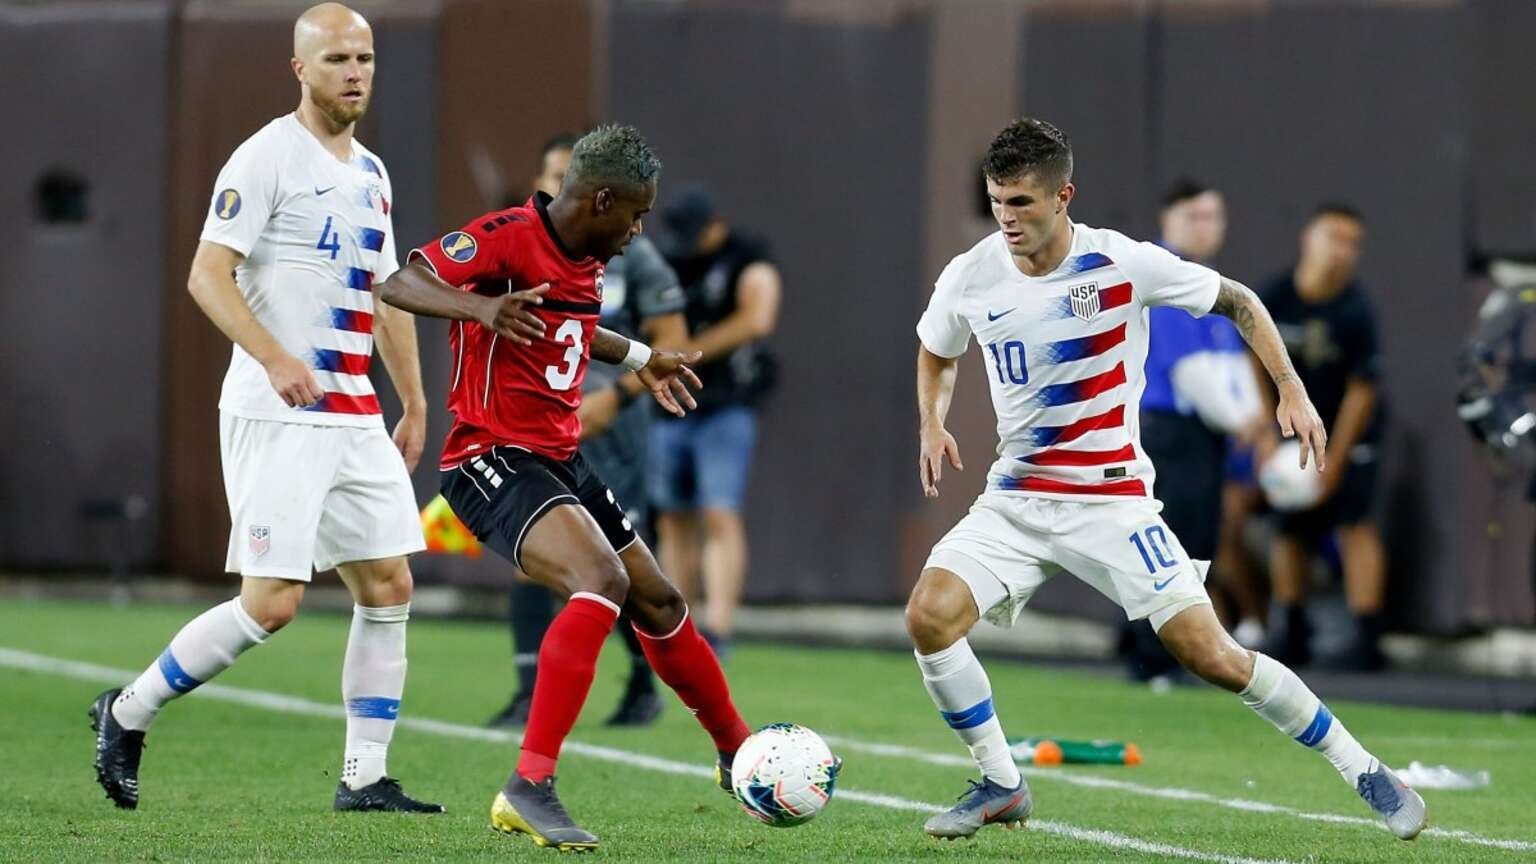 How to Watch USMNT vs Jamaica World Cup Qualifier Live Online Without